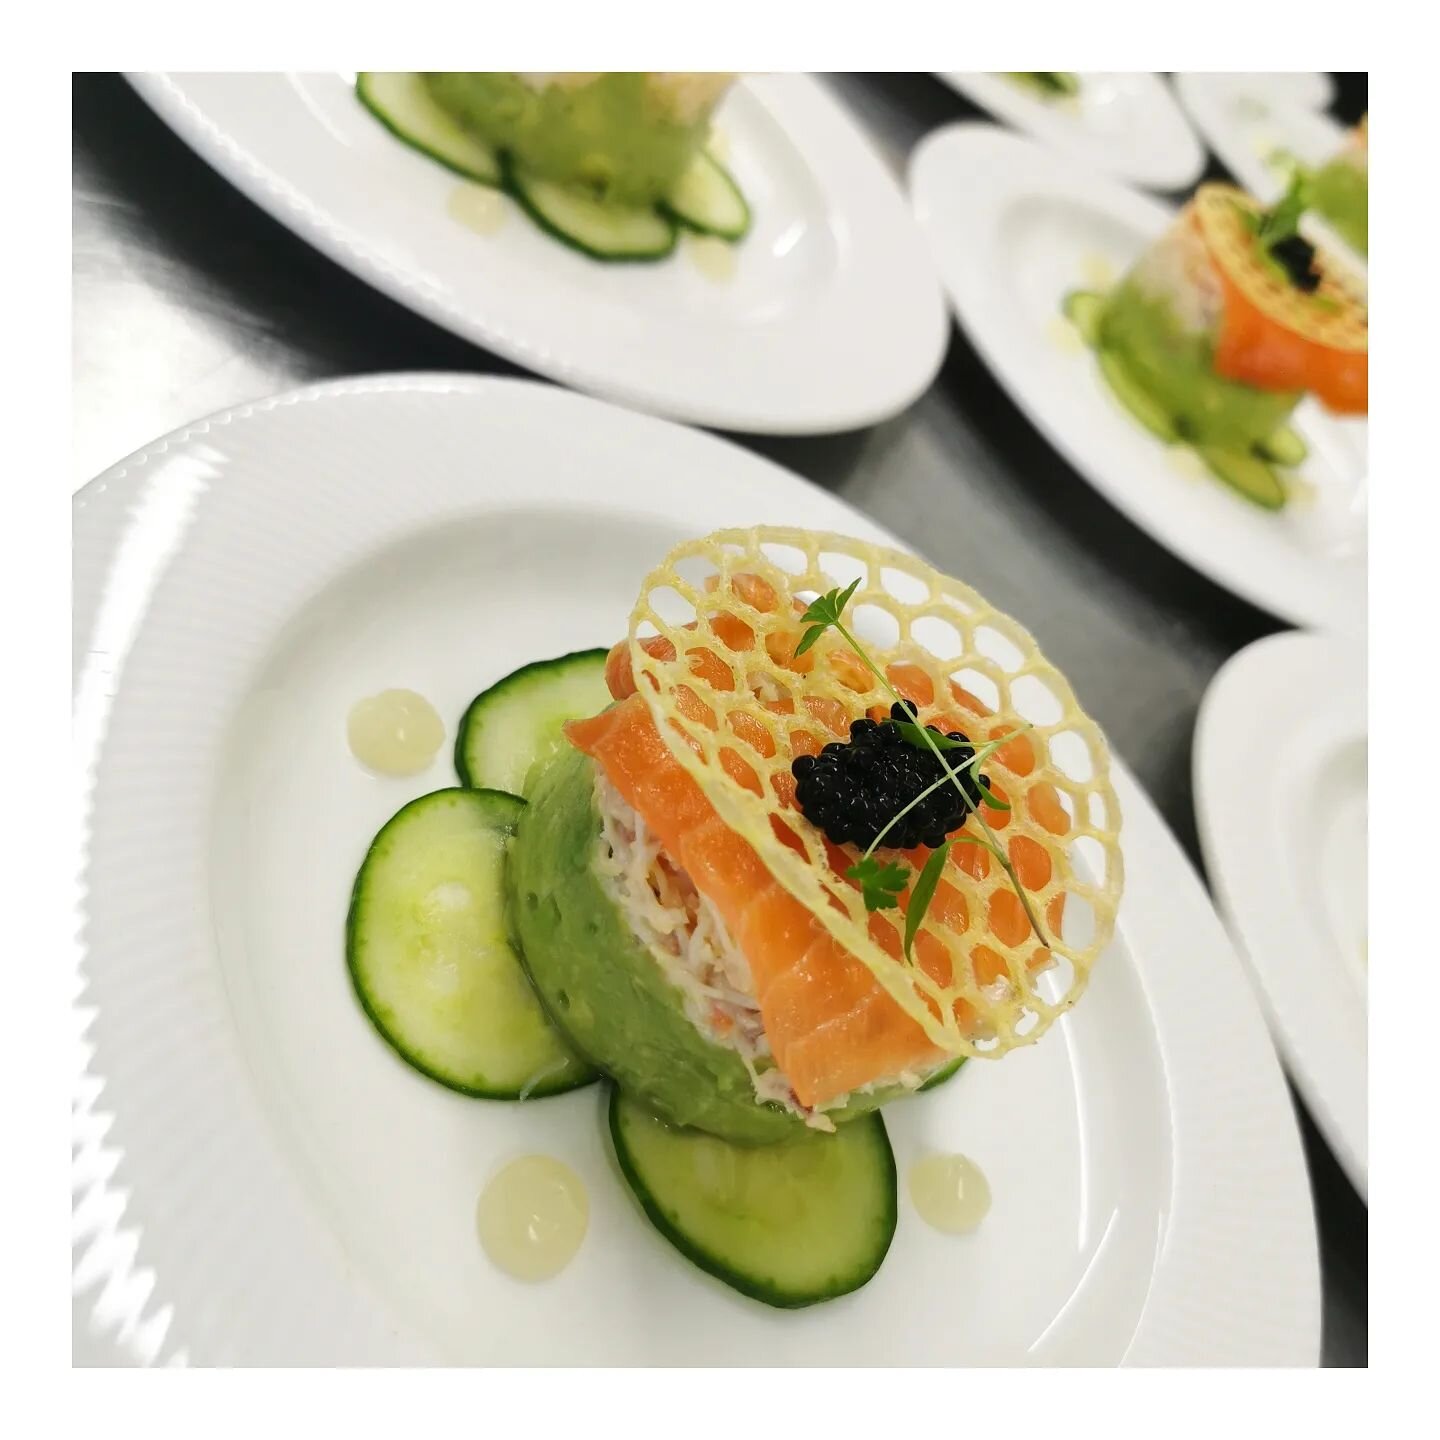 FEASTING

.. on the most exquisite Crab, Lobster and avocado tian at a stunning wedding in the Lake District. The delicate layers of fresh seafood and creamy avocado were simply divine! The picturesque views of the countryside added to the already ma